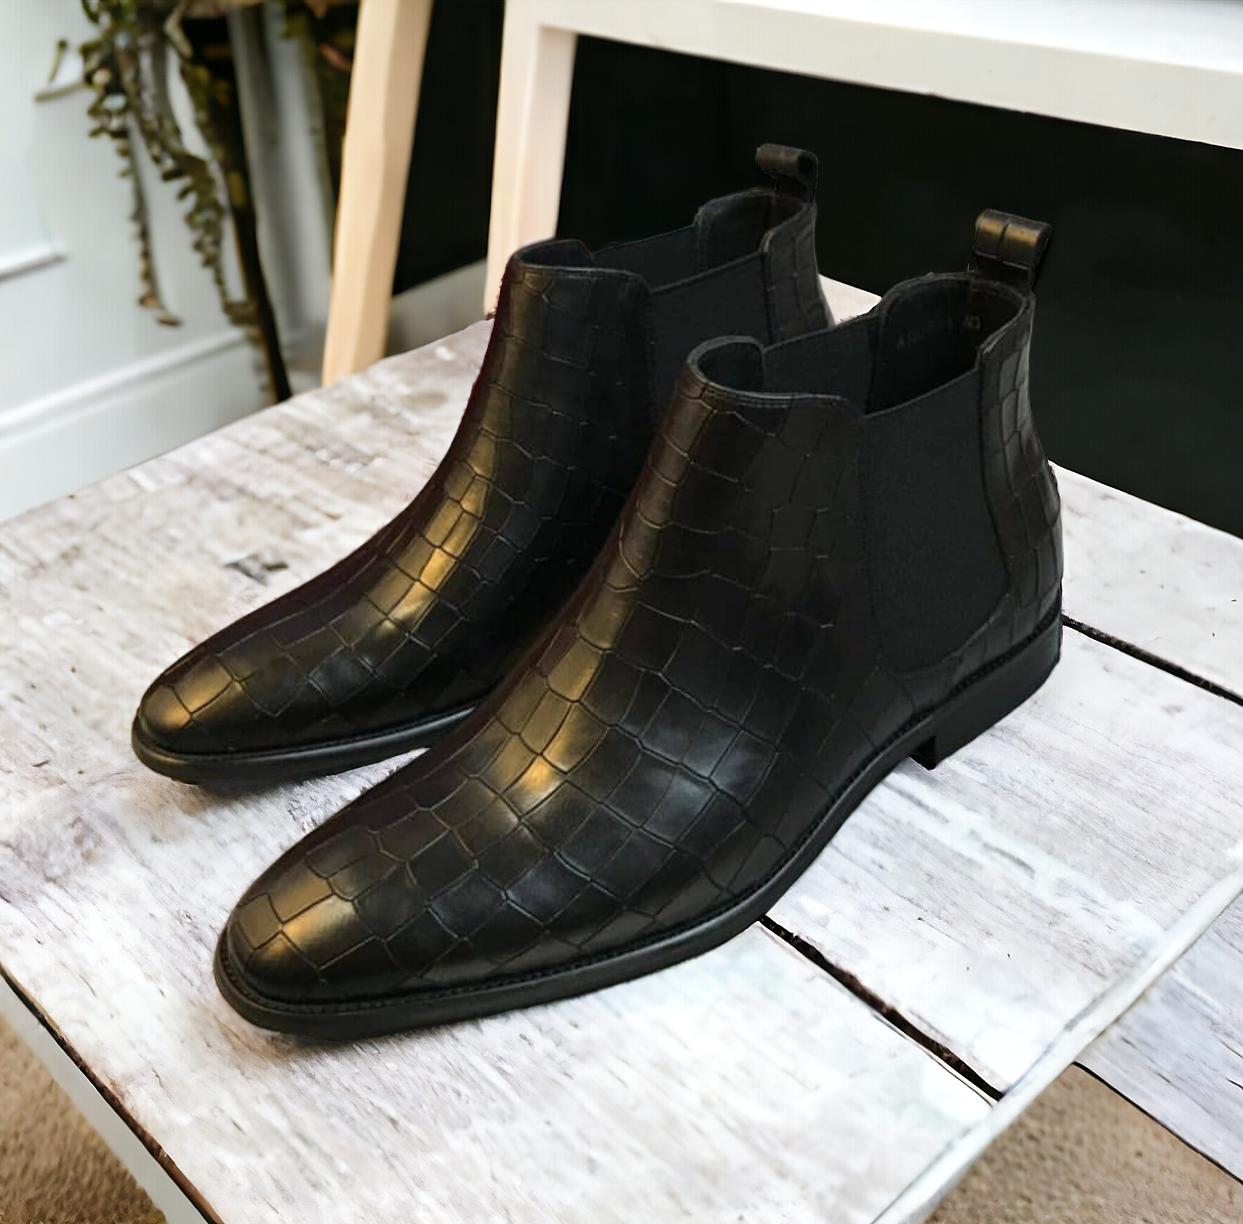 Jack Marc Faux Leather Crocs Chelsea Boots Perfect Fit for Every Occasion